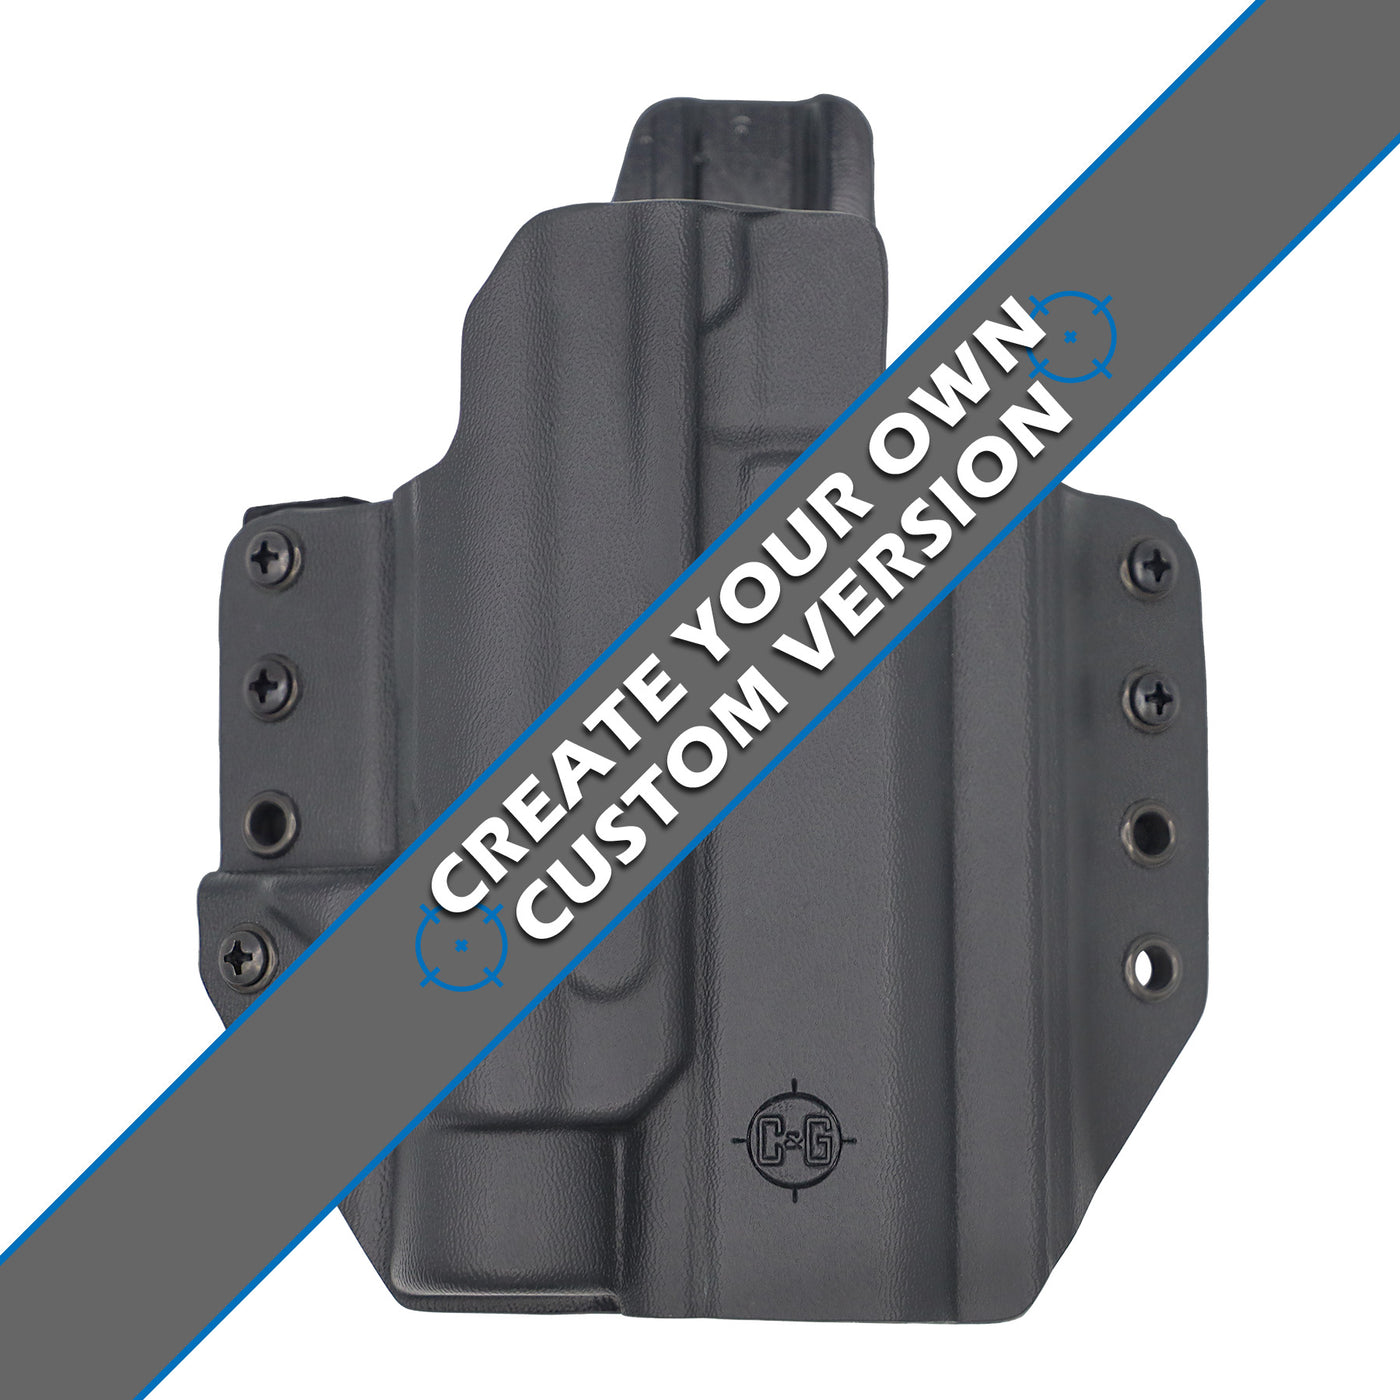 C&G Holsters custom OWB tactical staccato TLR1